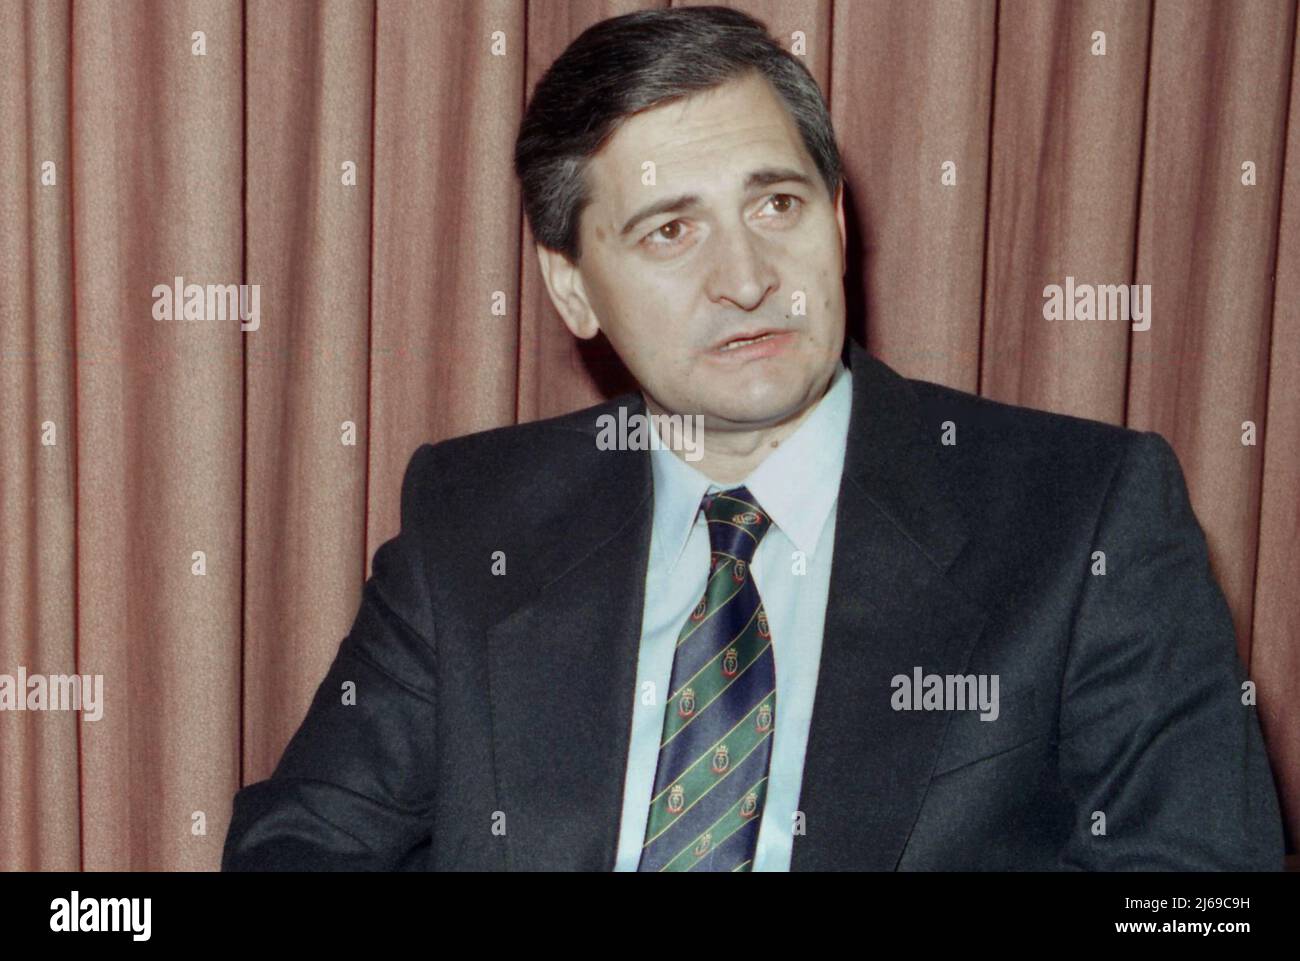 Washington D.C., USA, approx. 1995. Liviu Turcu, officer in the Romanian Secret Police during the communist era, who defected in January 1989 and asked for political asylum in the United States. Stock Photo